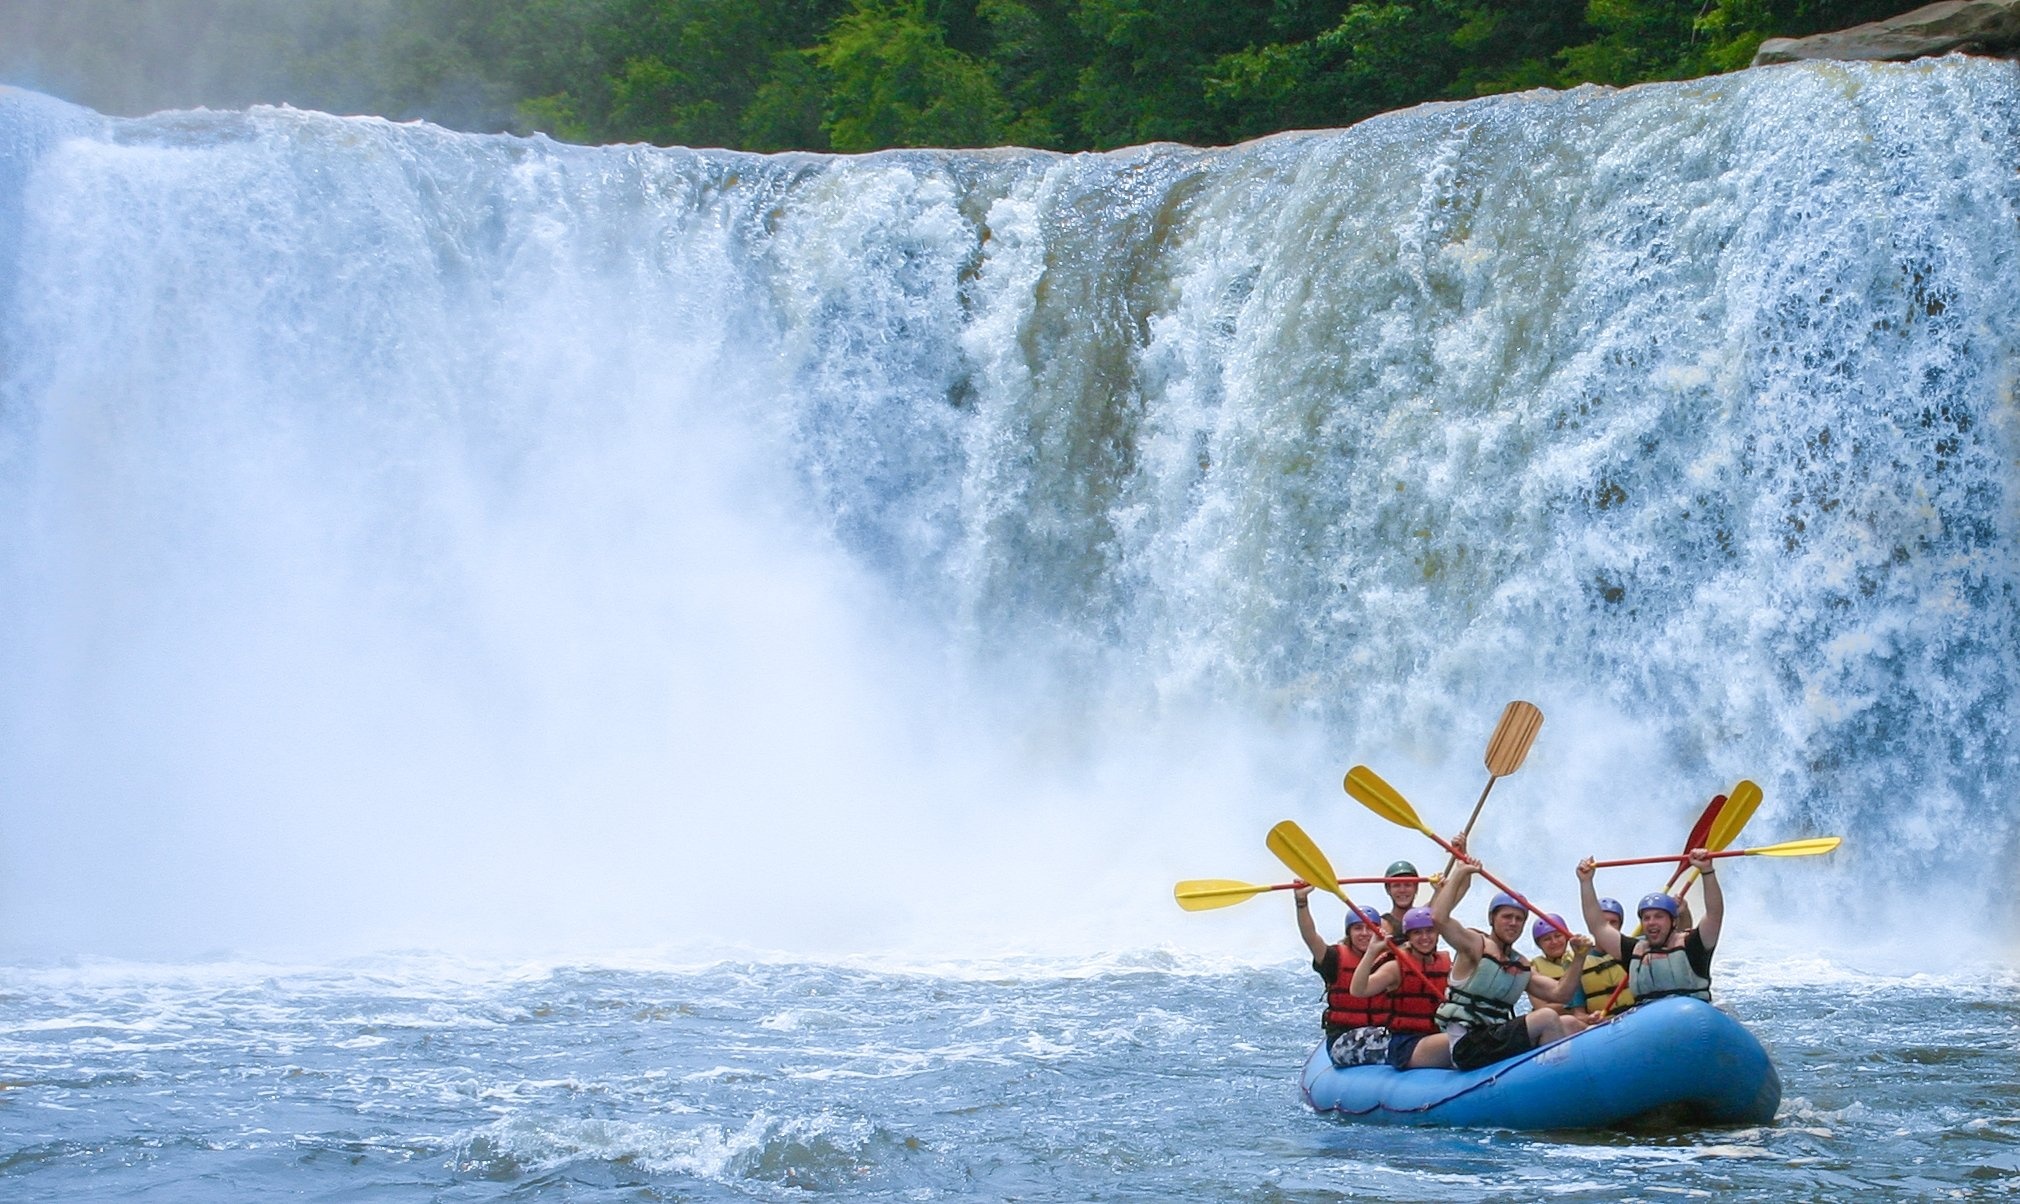 Rafting: An extreme whitewater boating activity near the waterfall. 2020x1210 HD Background.